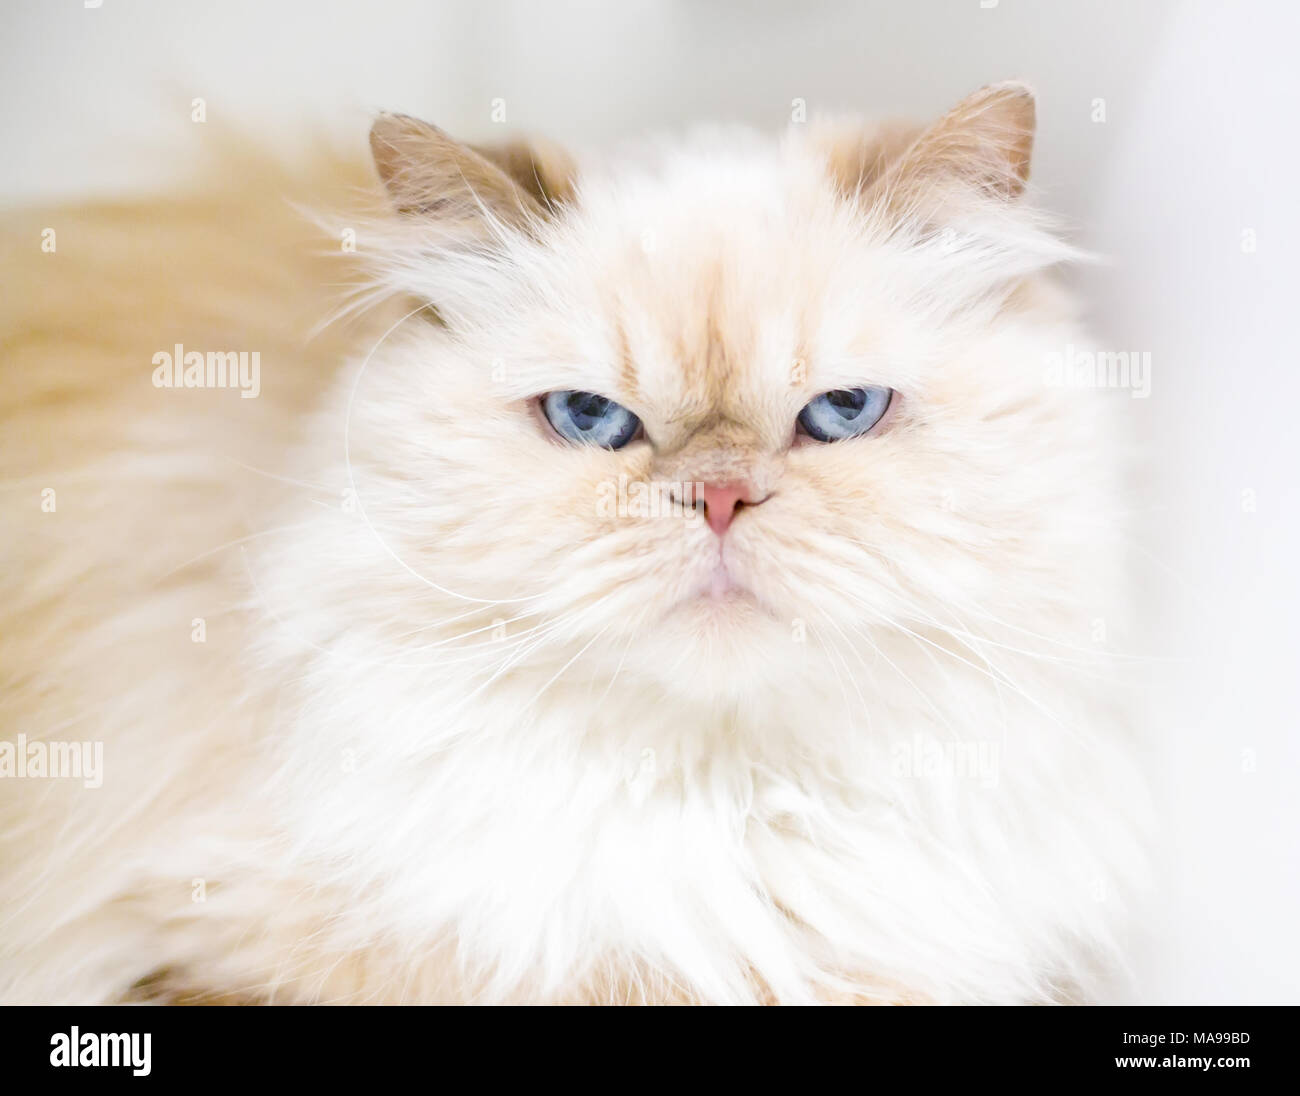 A flame point Persian cat with a grumpy expression Stock Photo